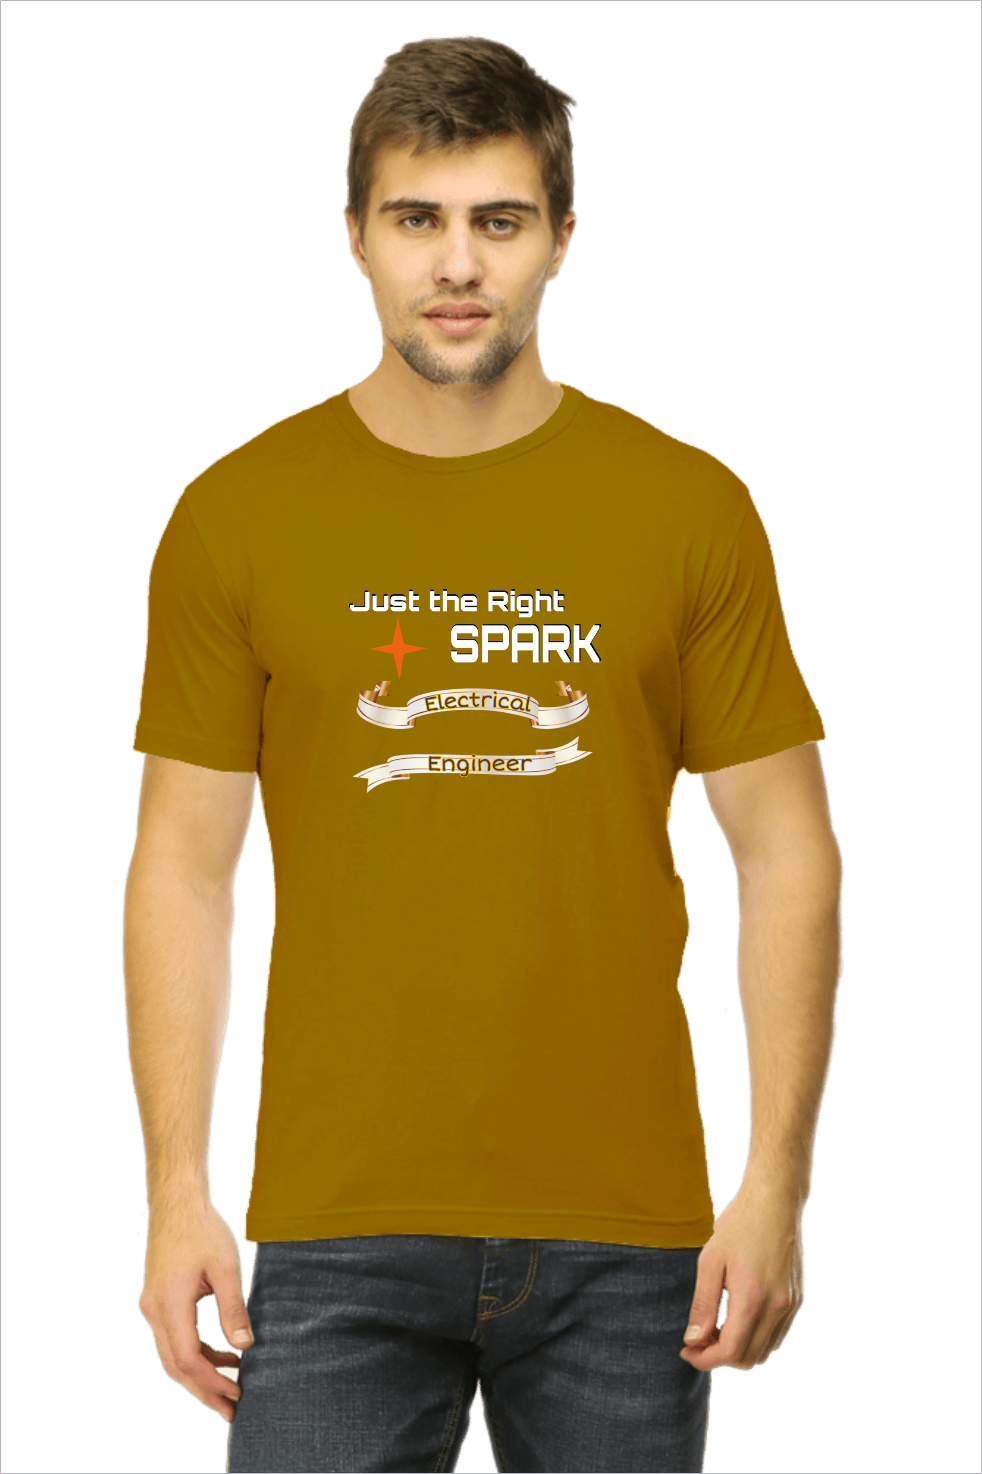 Mustard Yellow Cotton Tshirt for Electrical Engineers